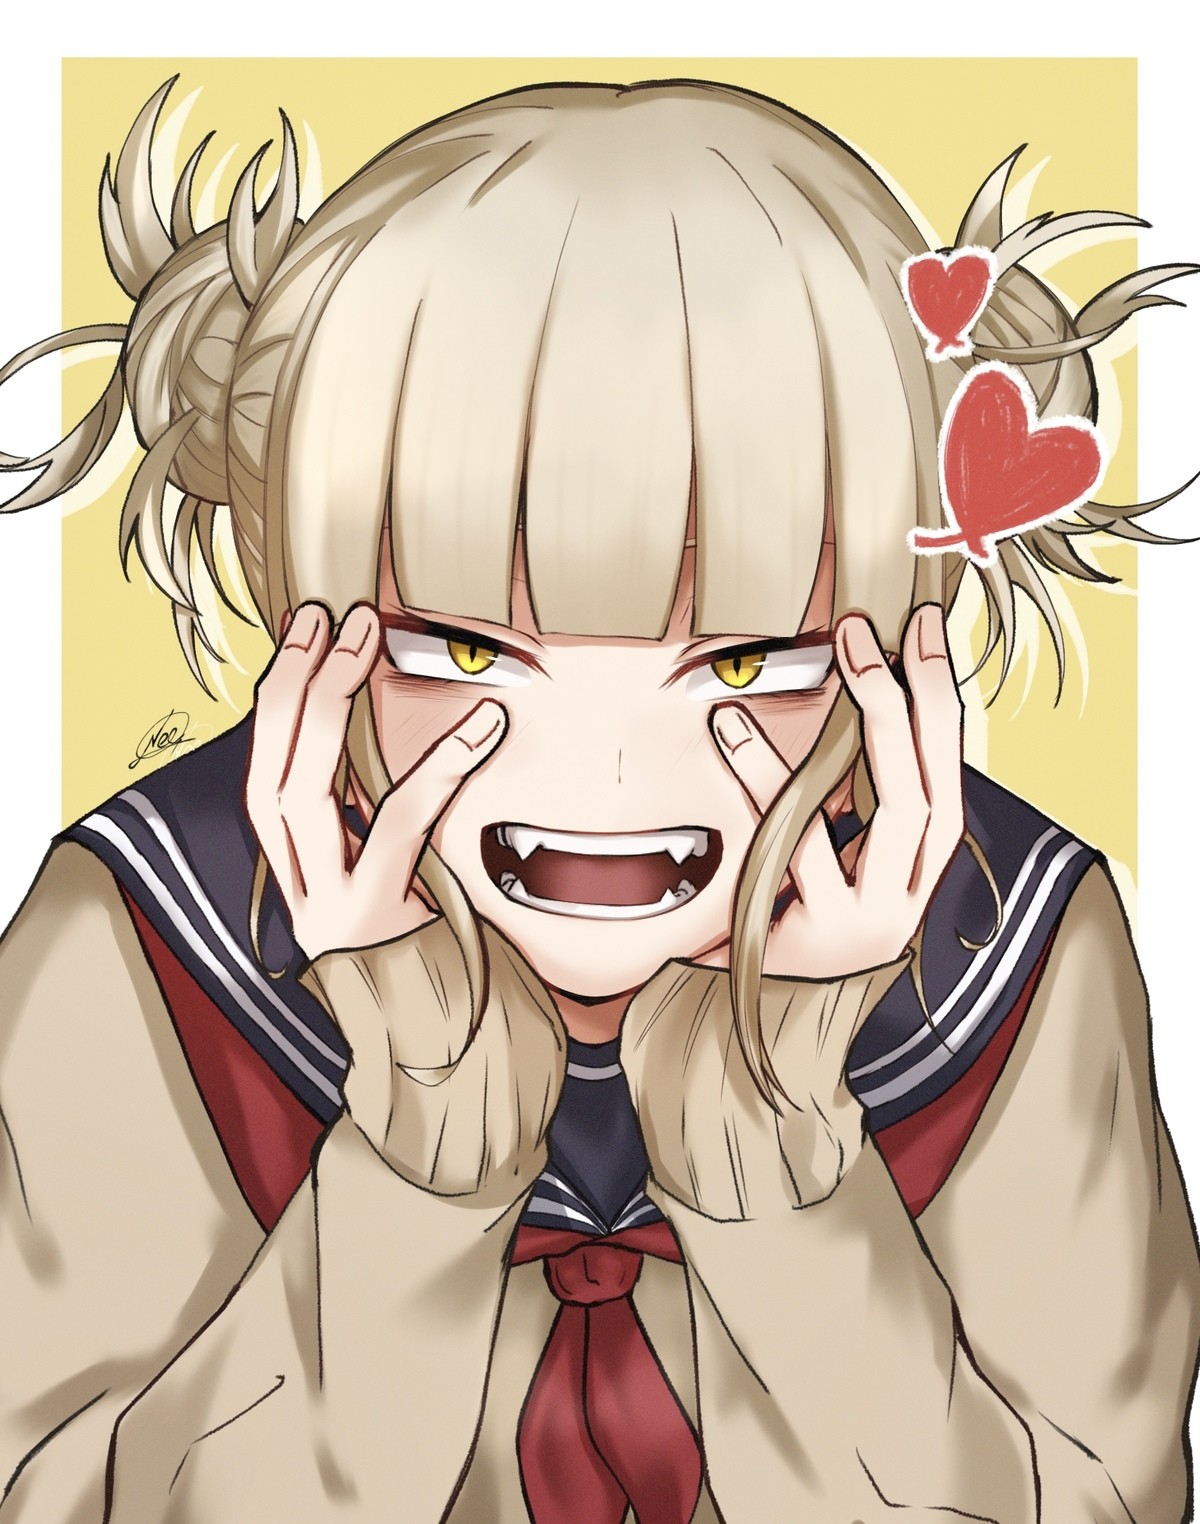 Daily Toga - 915: Loving Toga. join list: DailyToga (476 subs)Mention History Source: .